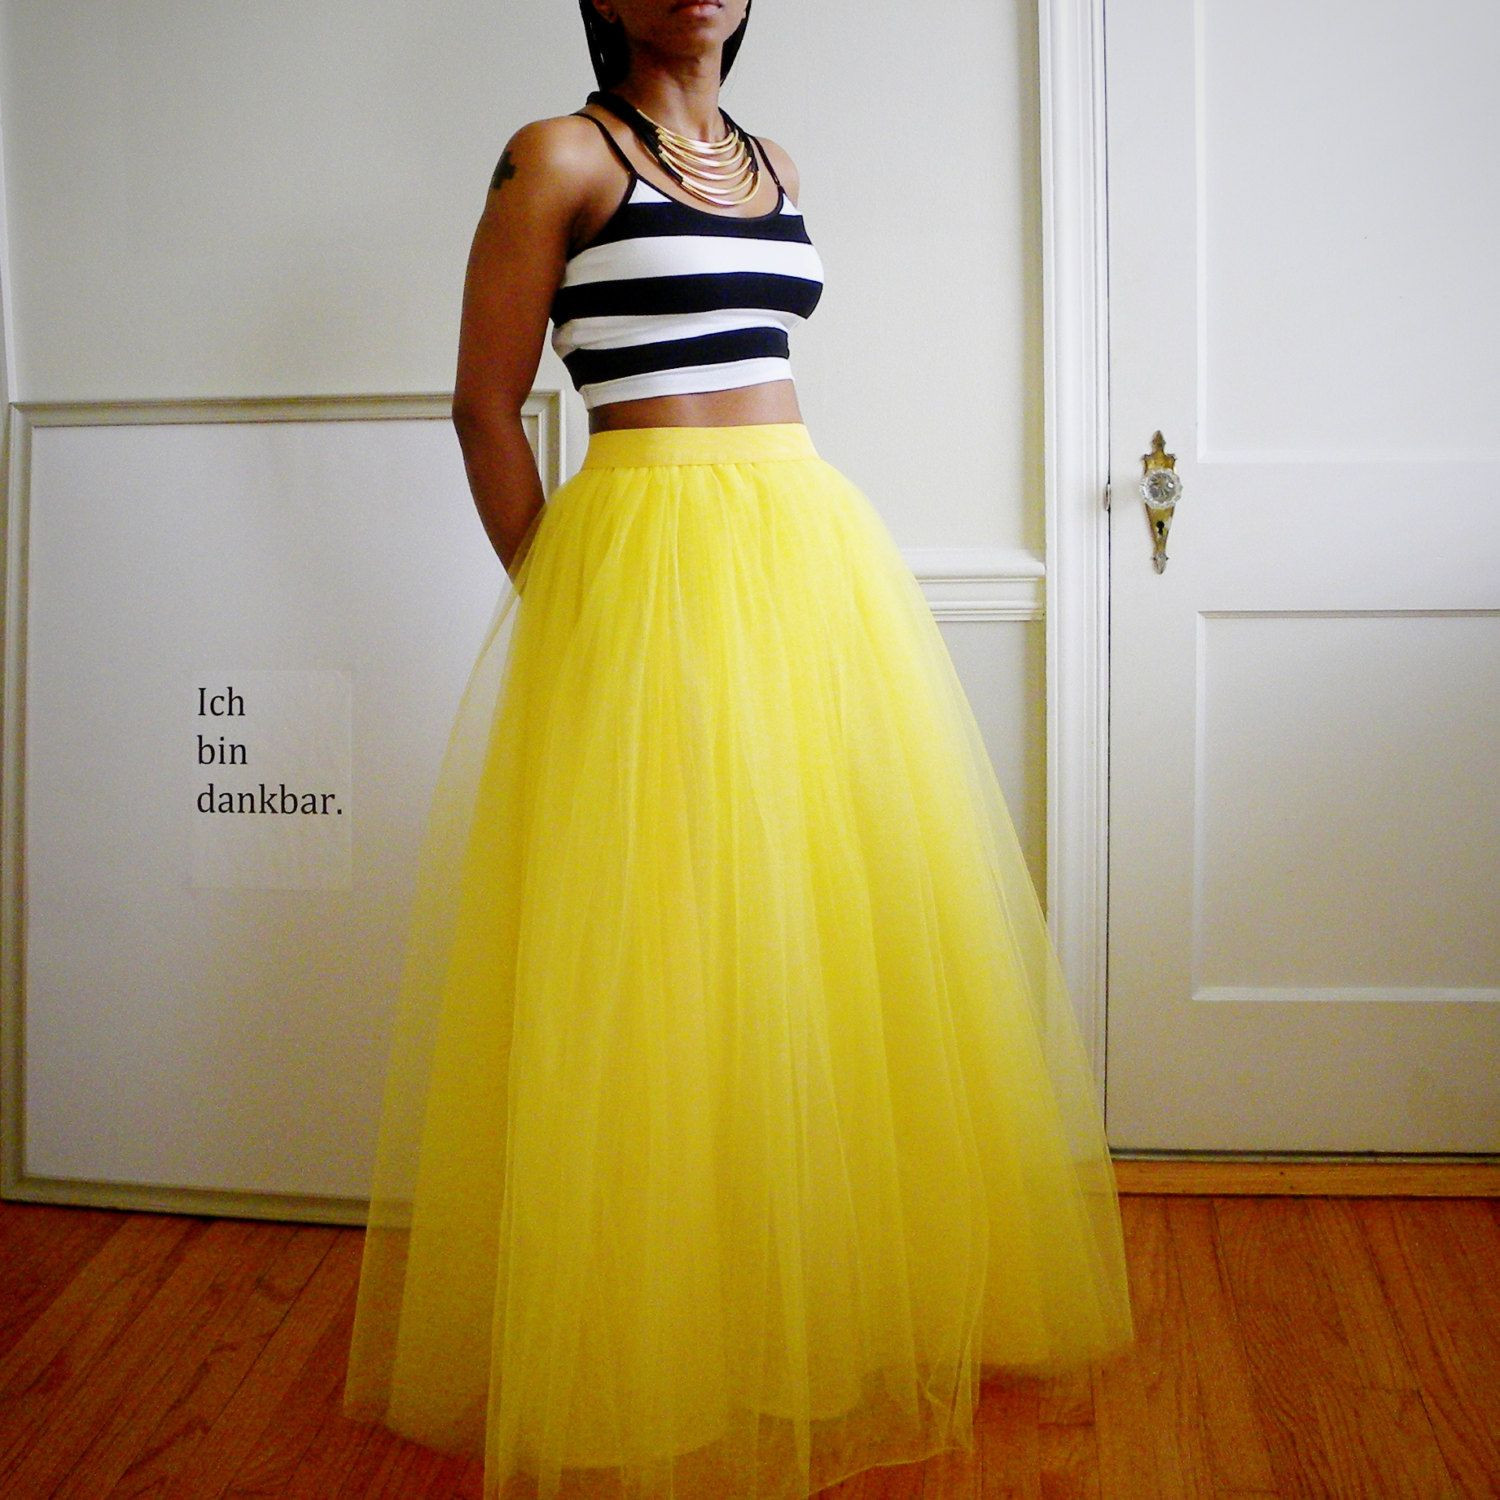 DIY Long Tulle Skirt For Adults
 Tutu Cute Skirt Maxi Yellow & Other Colors by 2live2love